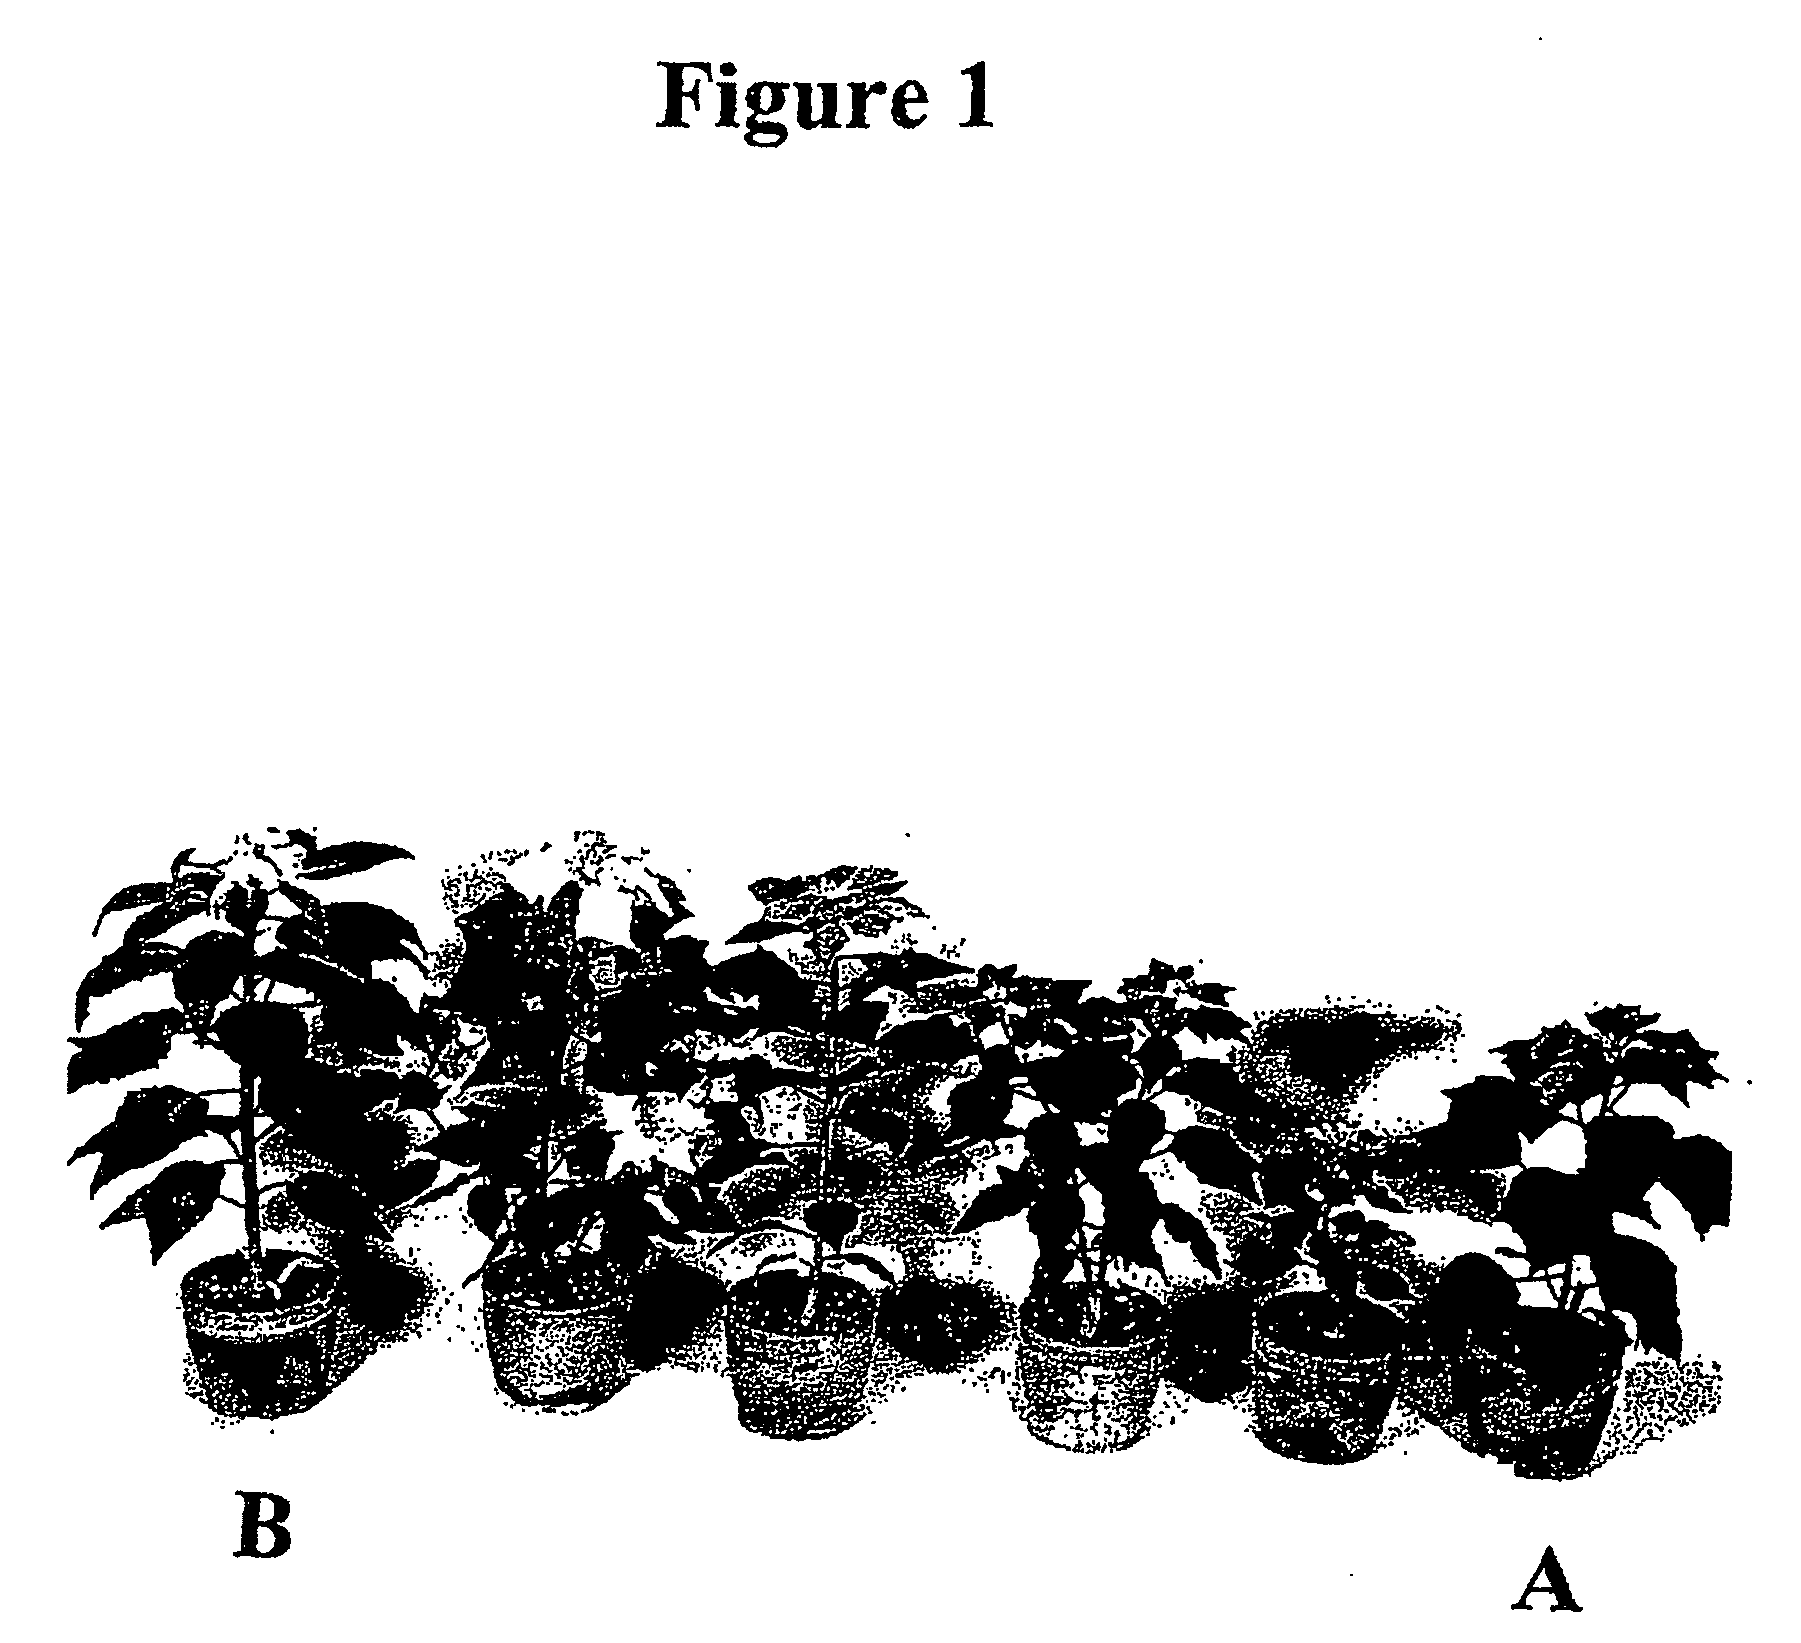 Method of producing euphorbia interspecific hybrid plants by cutting and then culturing the hybrid embryos